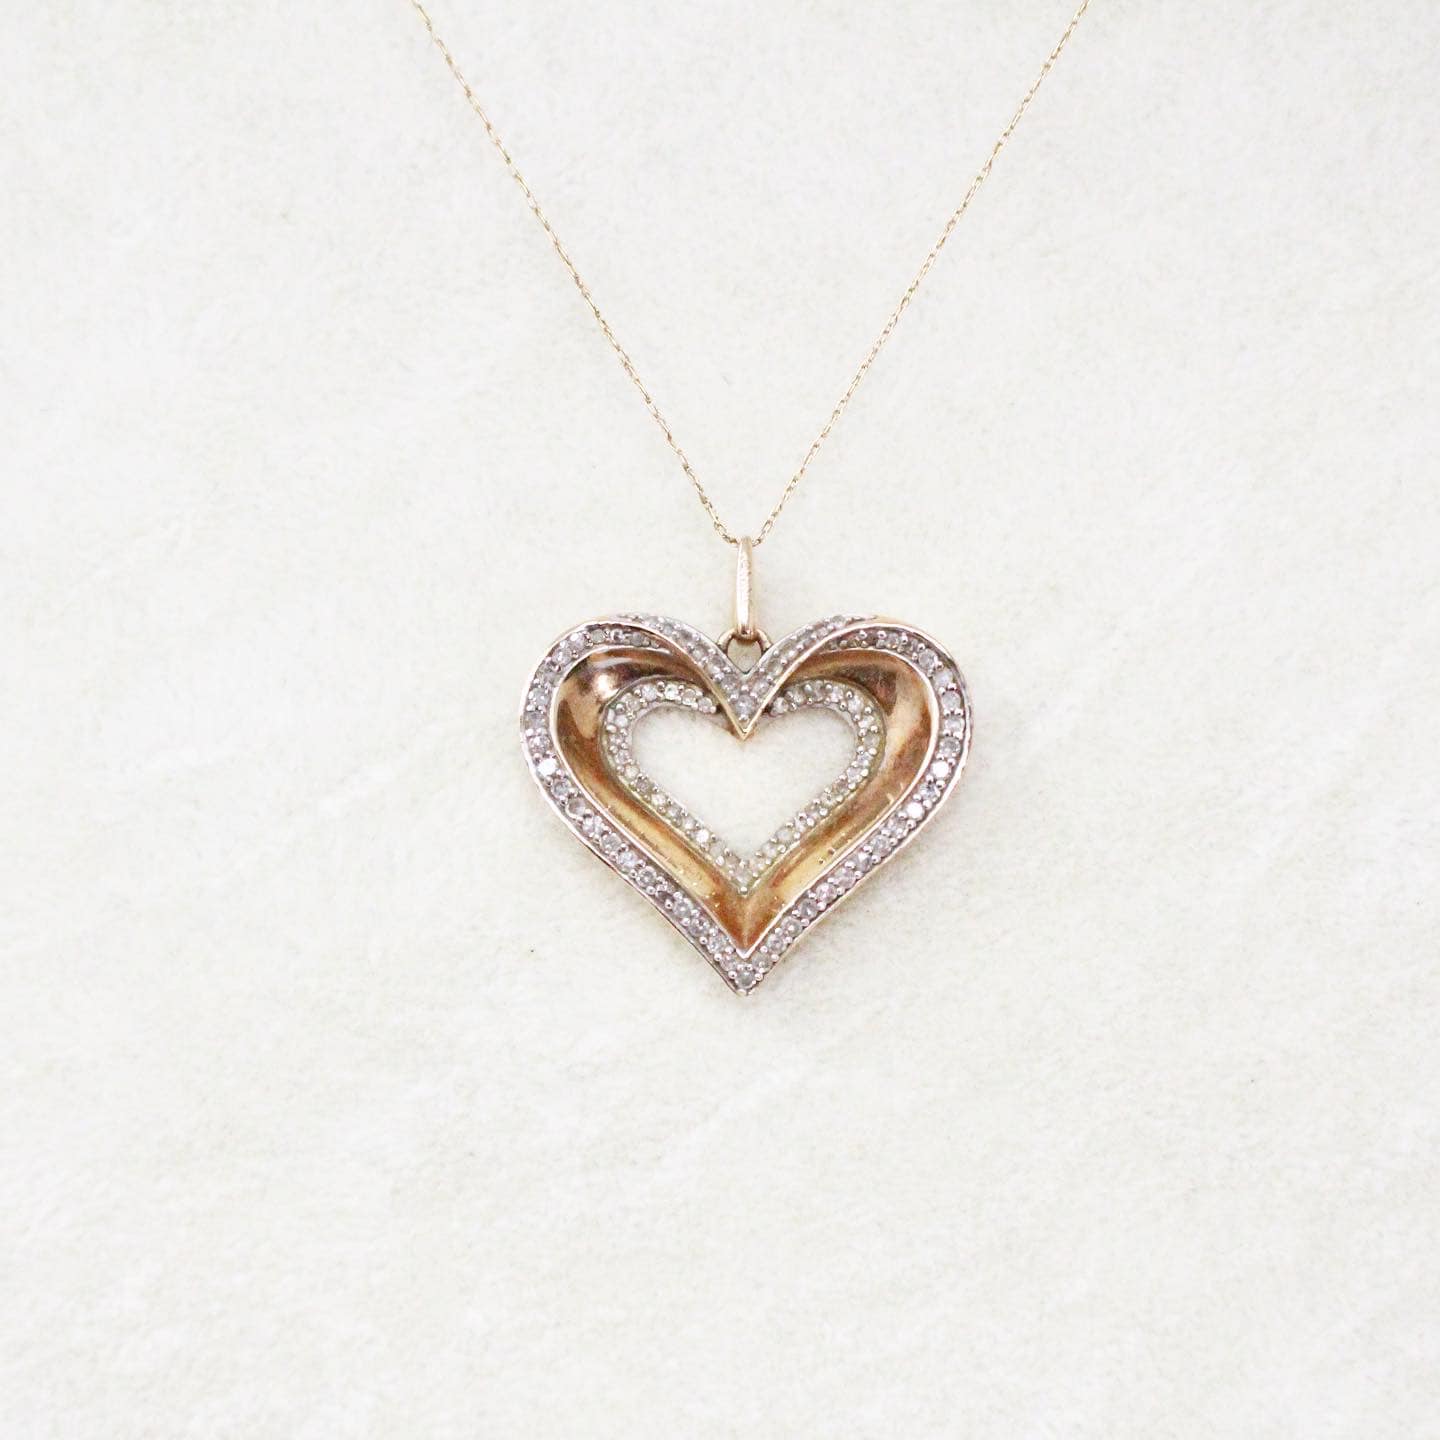 FINE JEWELRY 40300 Gold Chain with Diamond Heart Pendant Necklace 1